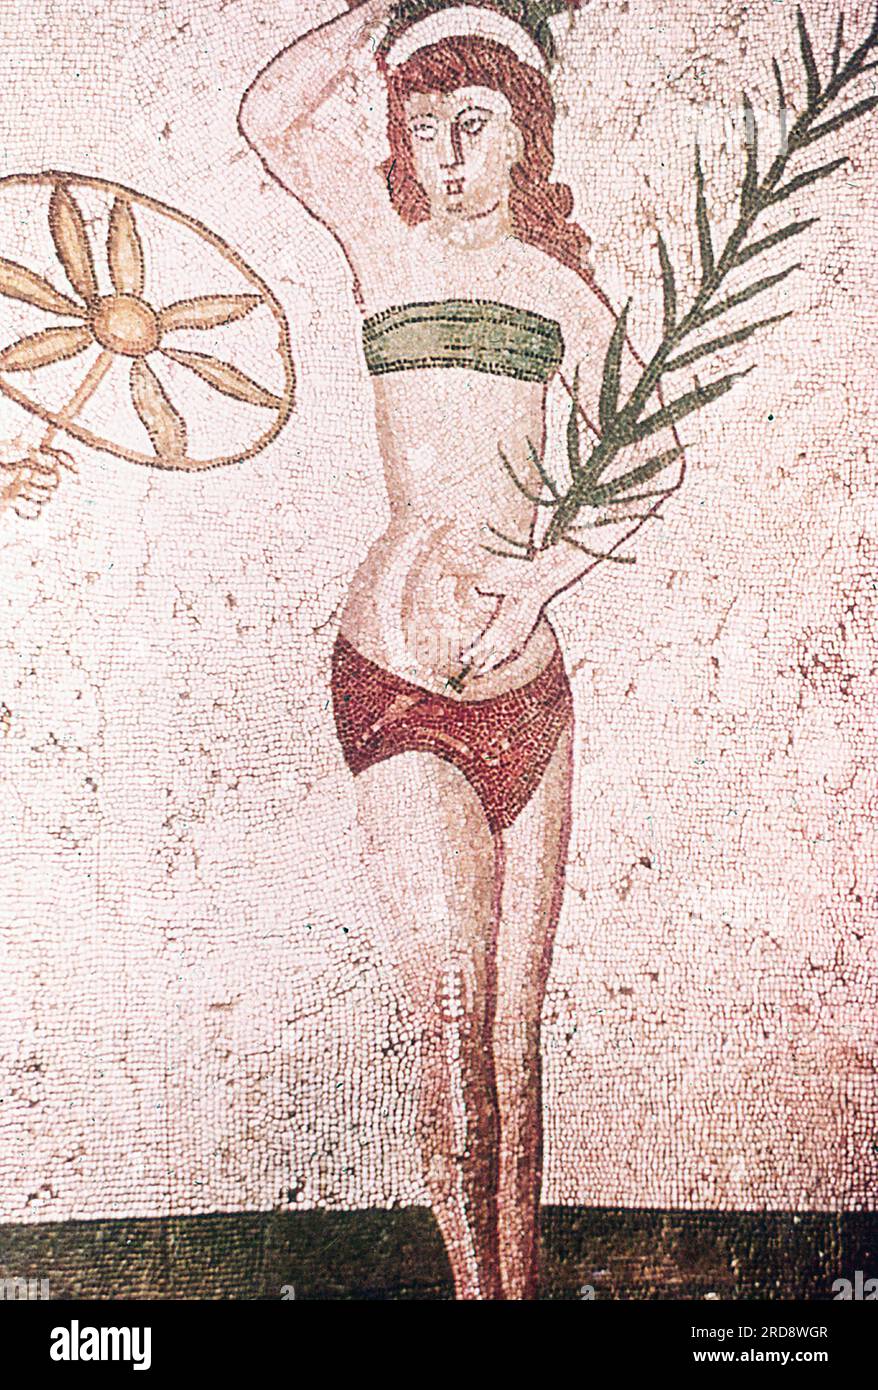 This photo of a mosaci of a girl in what resembles today's bikini was taken in the summer of 1970 at Piazza Armerina in Sicily. This photo of a mosaic of a girl in what resembles today's bikini was taken in the summer of 1970 at Piazza Armerina in Sicily. Piazza Armerina is home to the Roman Villa del Casale and its famous mosaics, the 'finest mosaics in situ anywhere in the Roman world,' as described by UNESCO, which inserted it into its World Heritage list in 1997. Villa Romana was a lavish patrician residence built at the center of a huge latifundium (agricultural estate) at the end of the Stock Photo